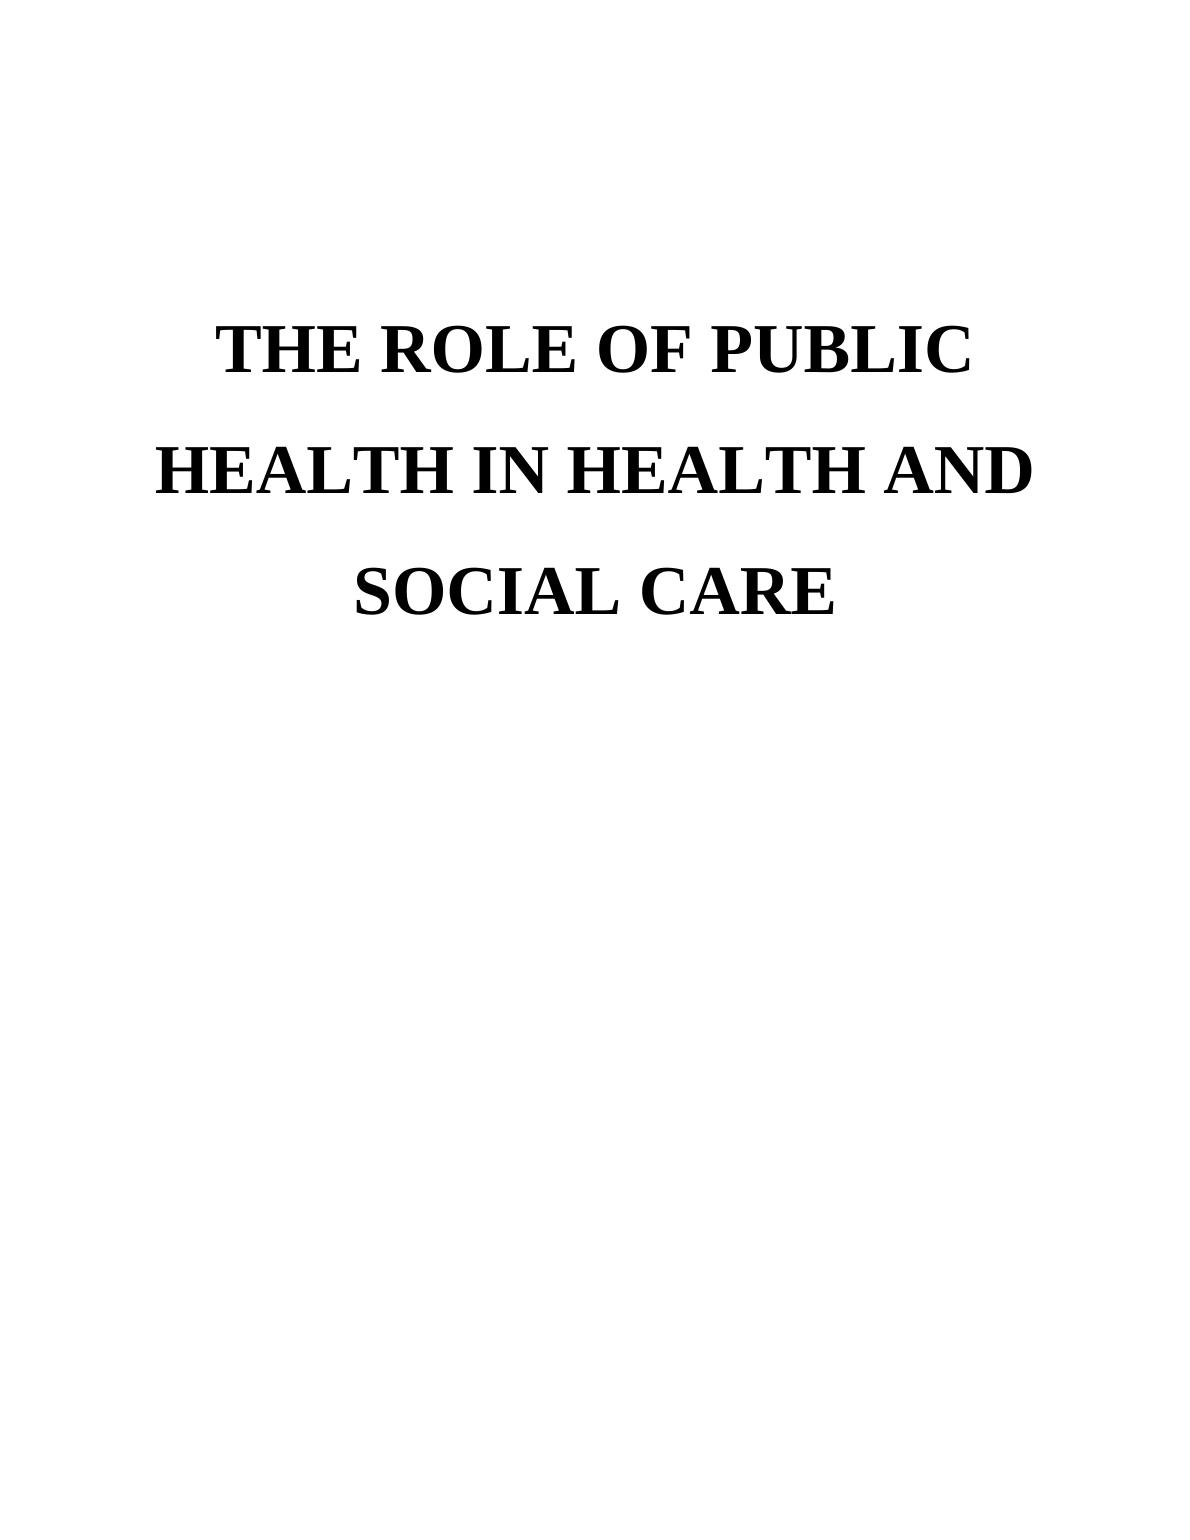 Role of Public Health in Health and Social Care - Assignment_1